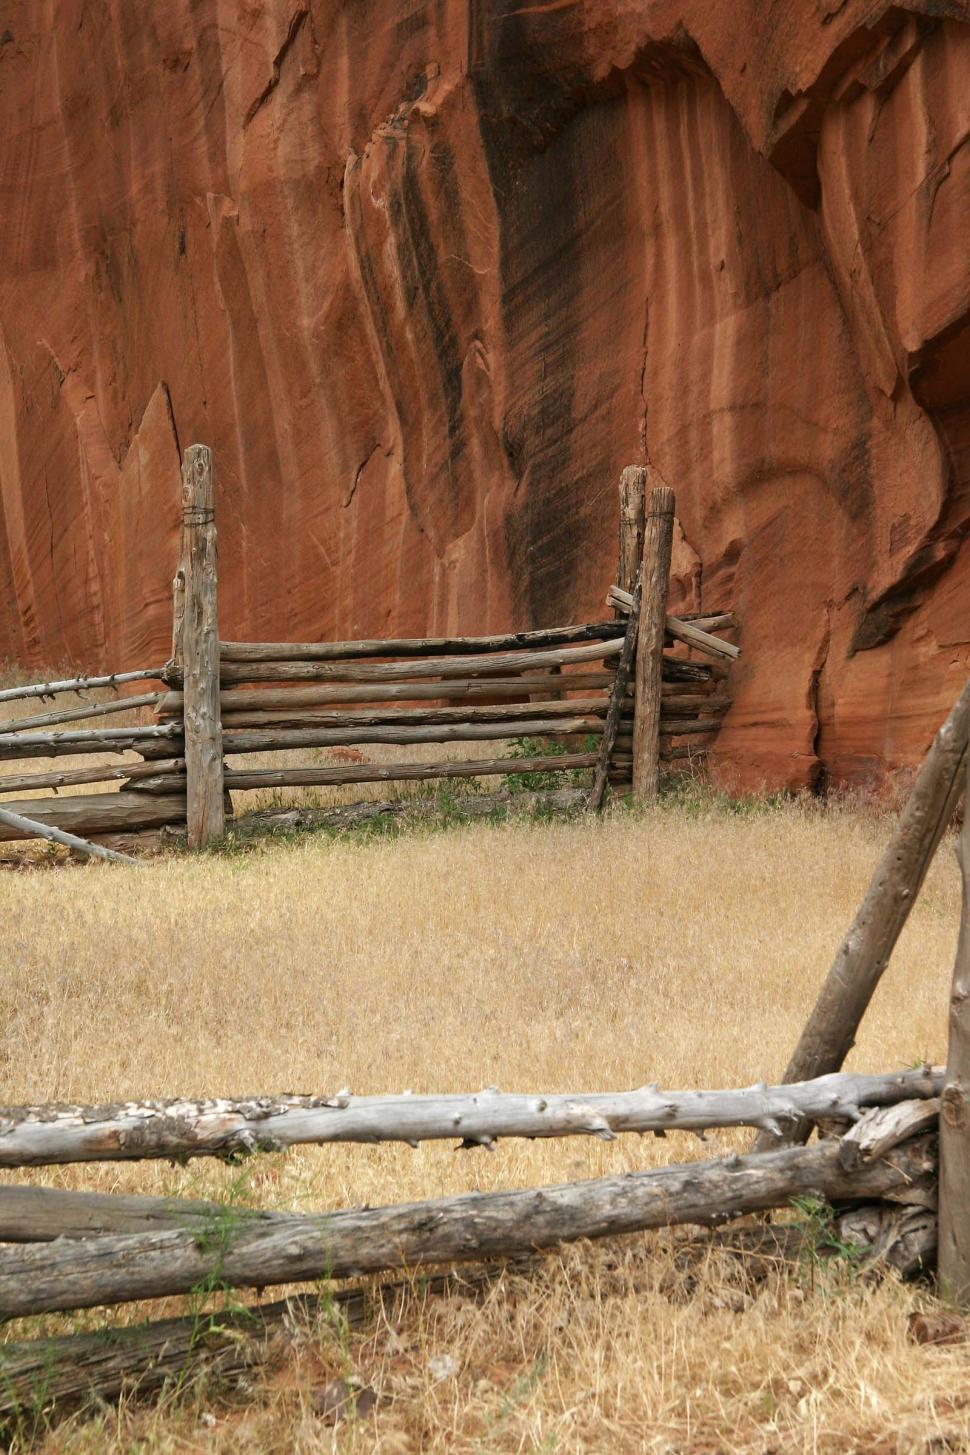 Free Image of cliff cliffs canyon de chelly chelly canyon de arizona indian native american monument national navajo southwest log rail fence corral grass dried weeds post ranch 